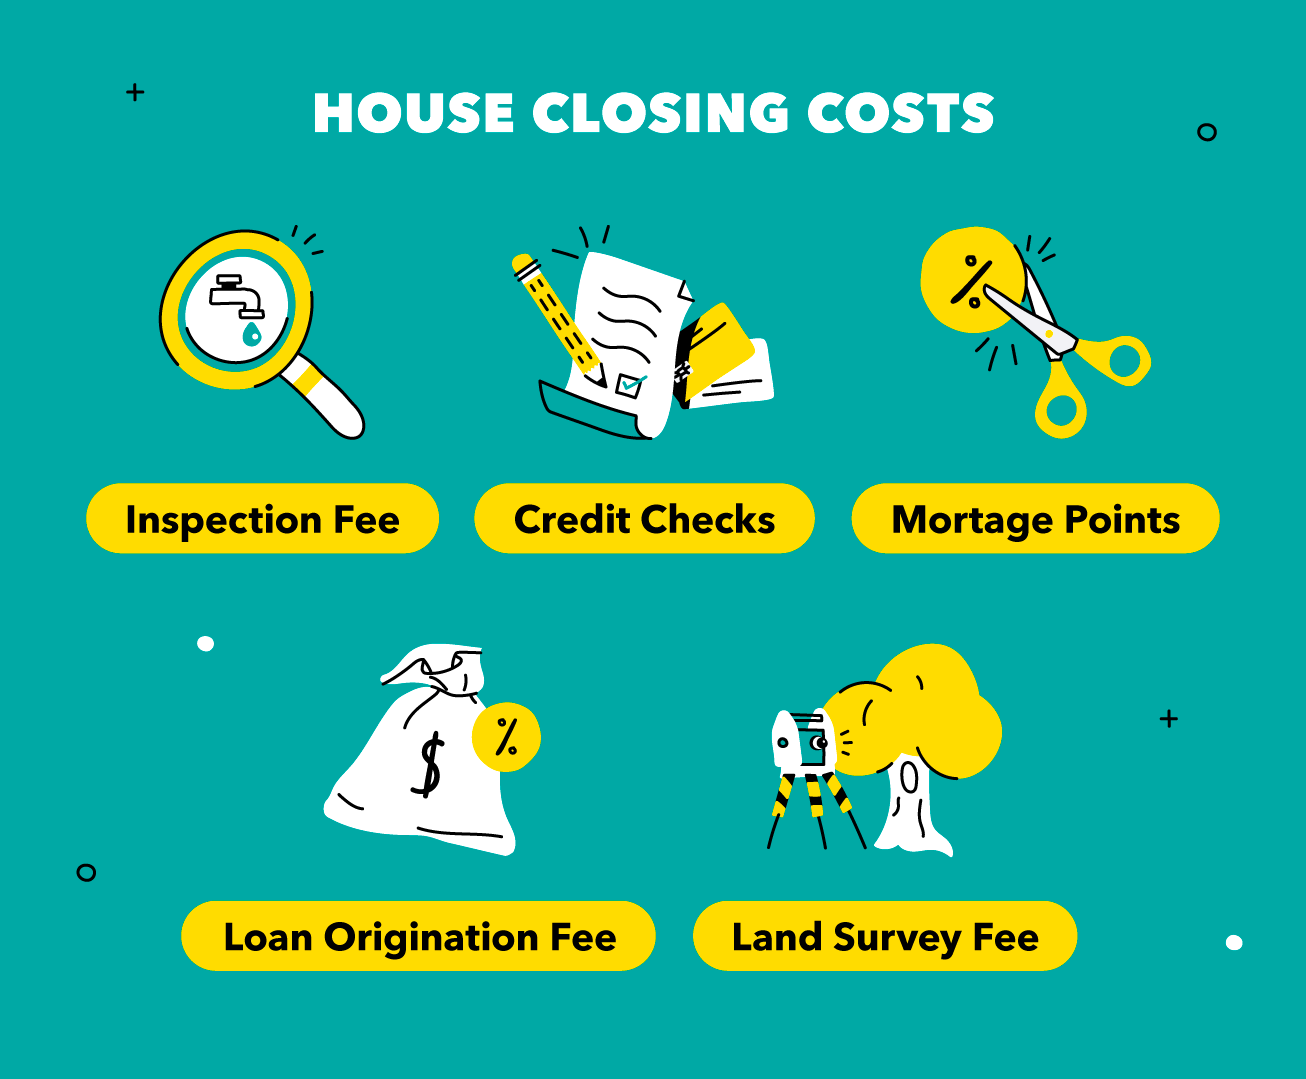 What Are Closing Costs on a House?